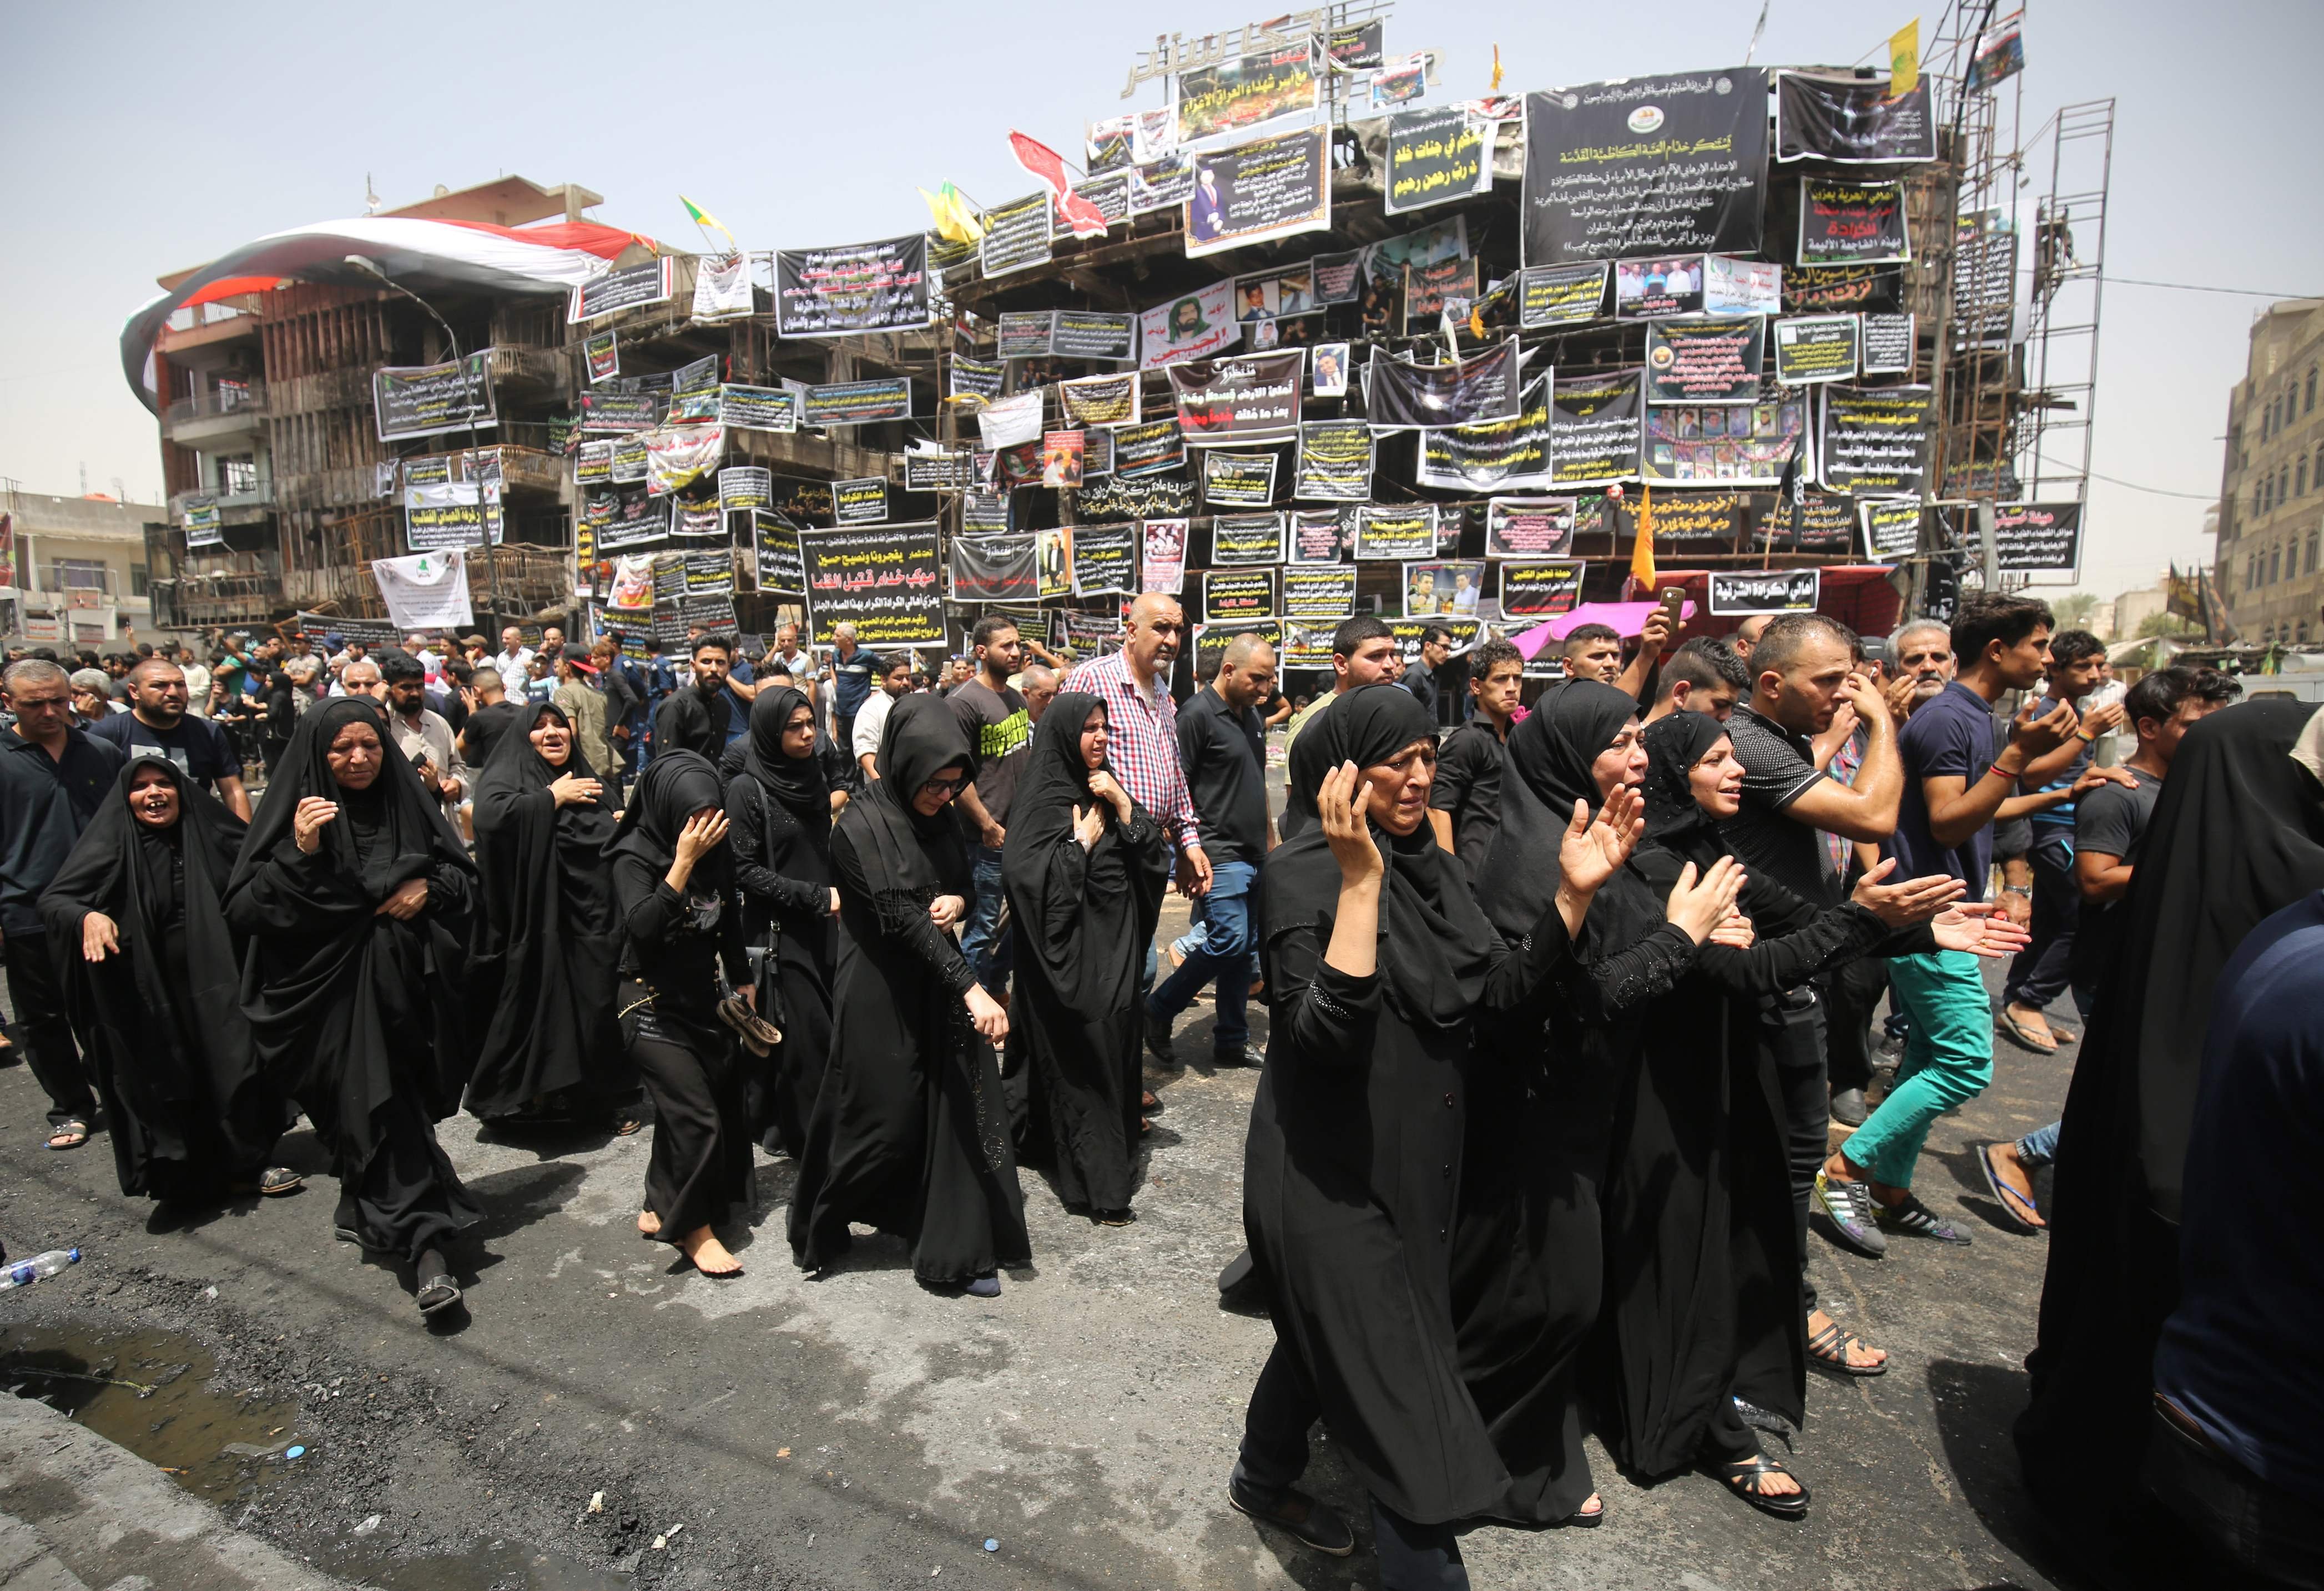 Mourners walk during the funeral of an Iraqi man who was killed in a suicide bombing attack in Baghdad, on July 6, 2016. (Ahmad al-Rubaye—AFP/Getty Images)